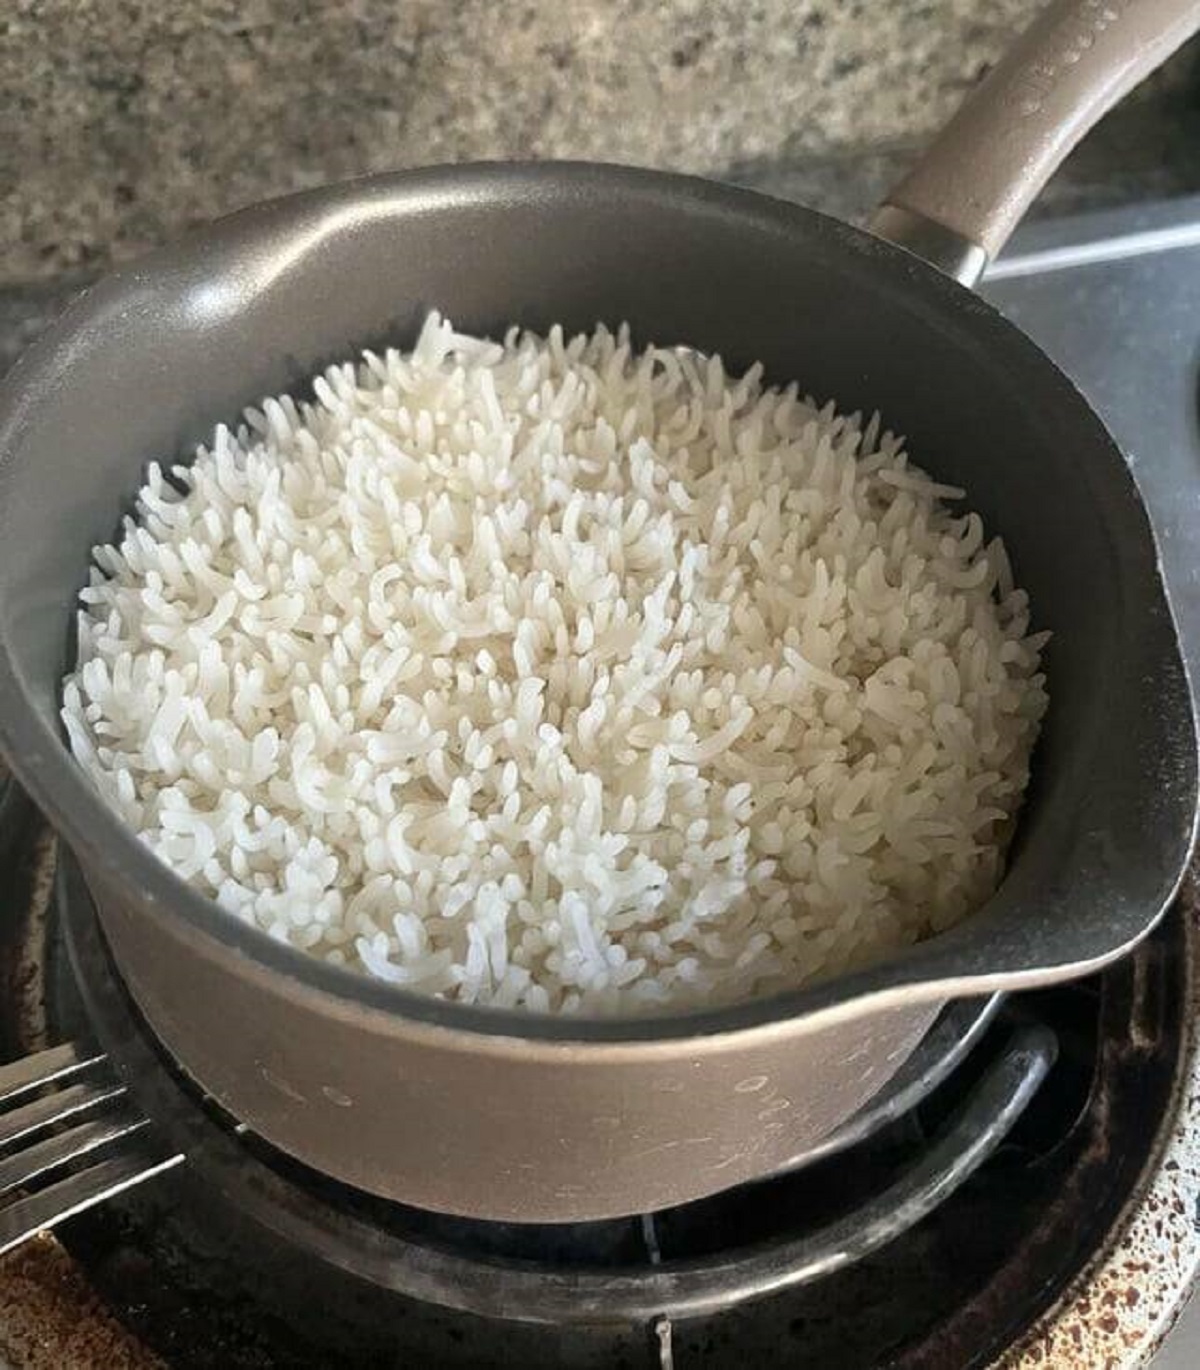 "My rice pointing upwards after cooking"